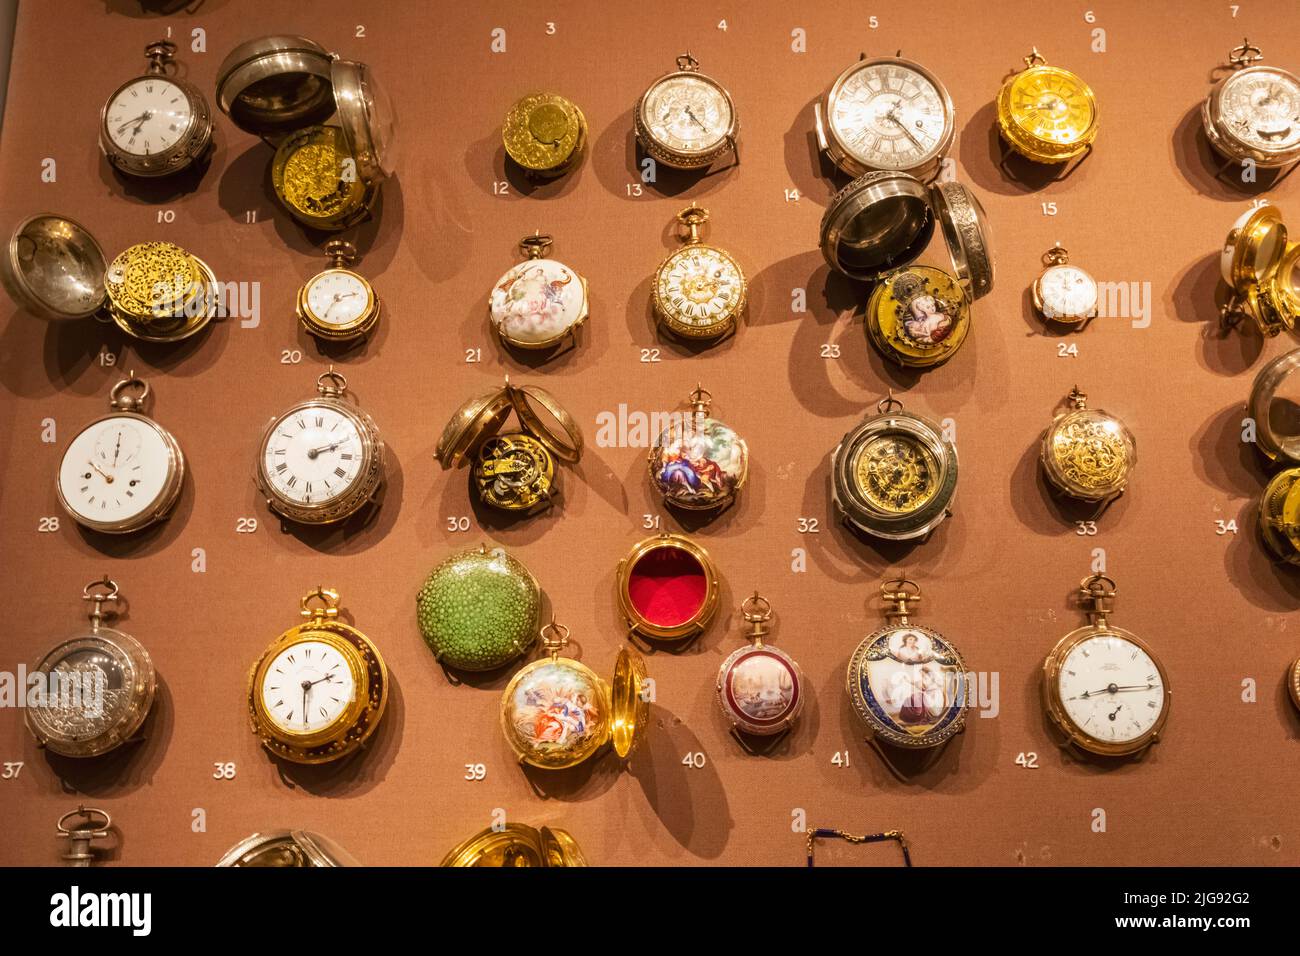 England, London, South Kensington, Science Museum, Display of The Nelthropp Collection of Pocket Watches Stock Photo